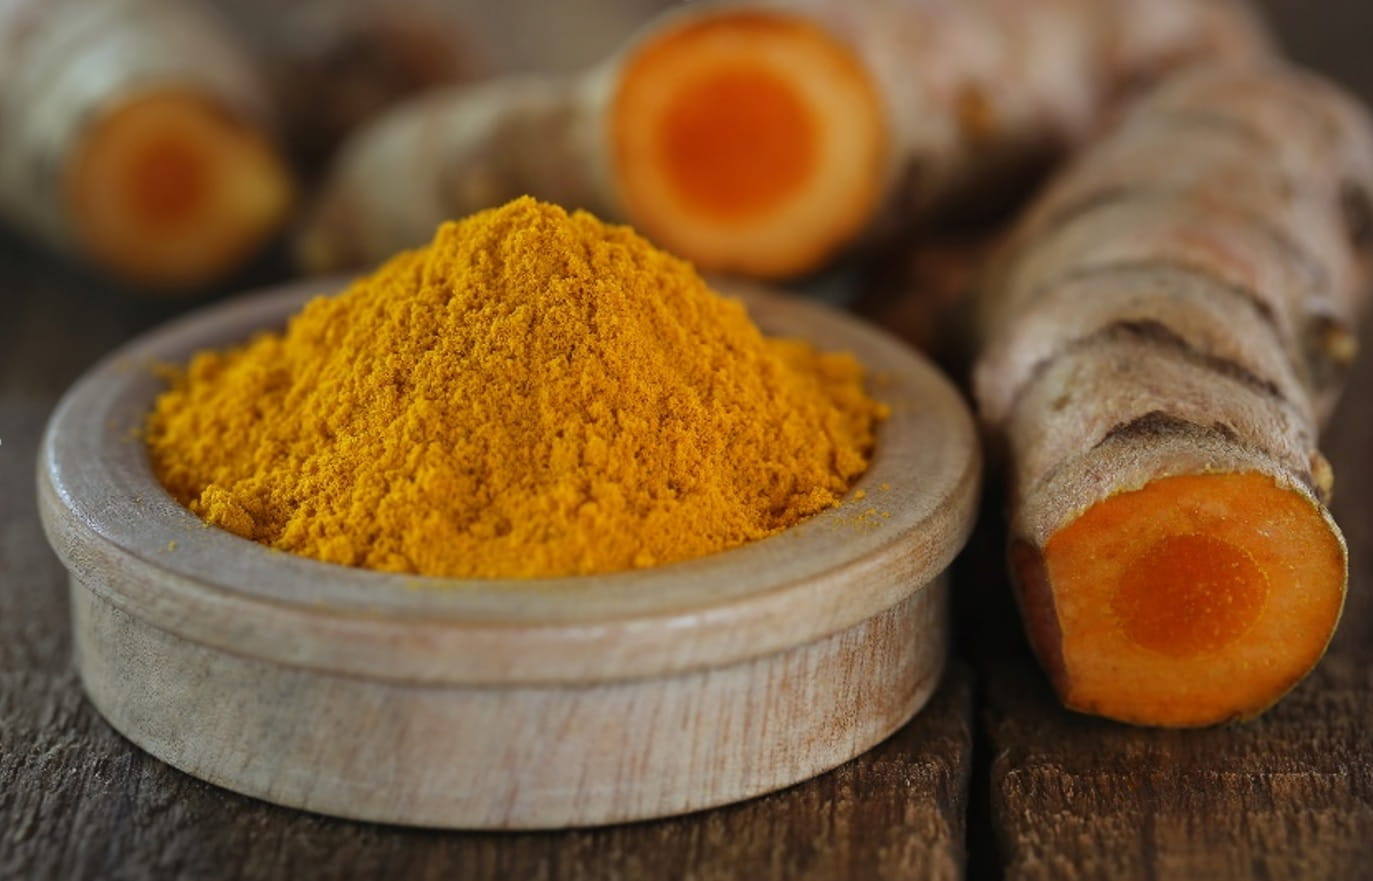 MSI Funded Paper: Potential Health Benefits of Turmeric